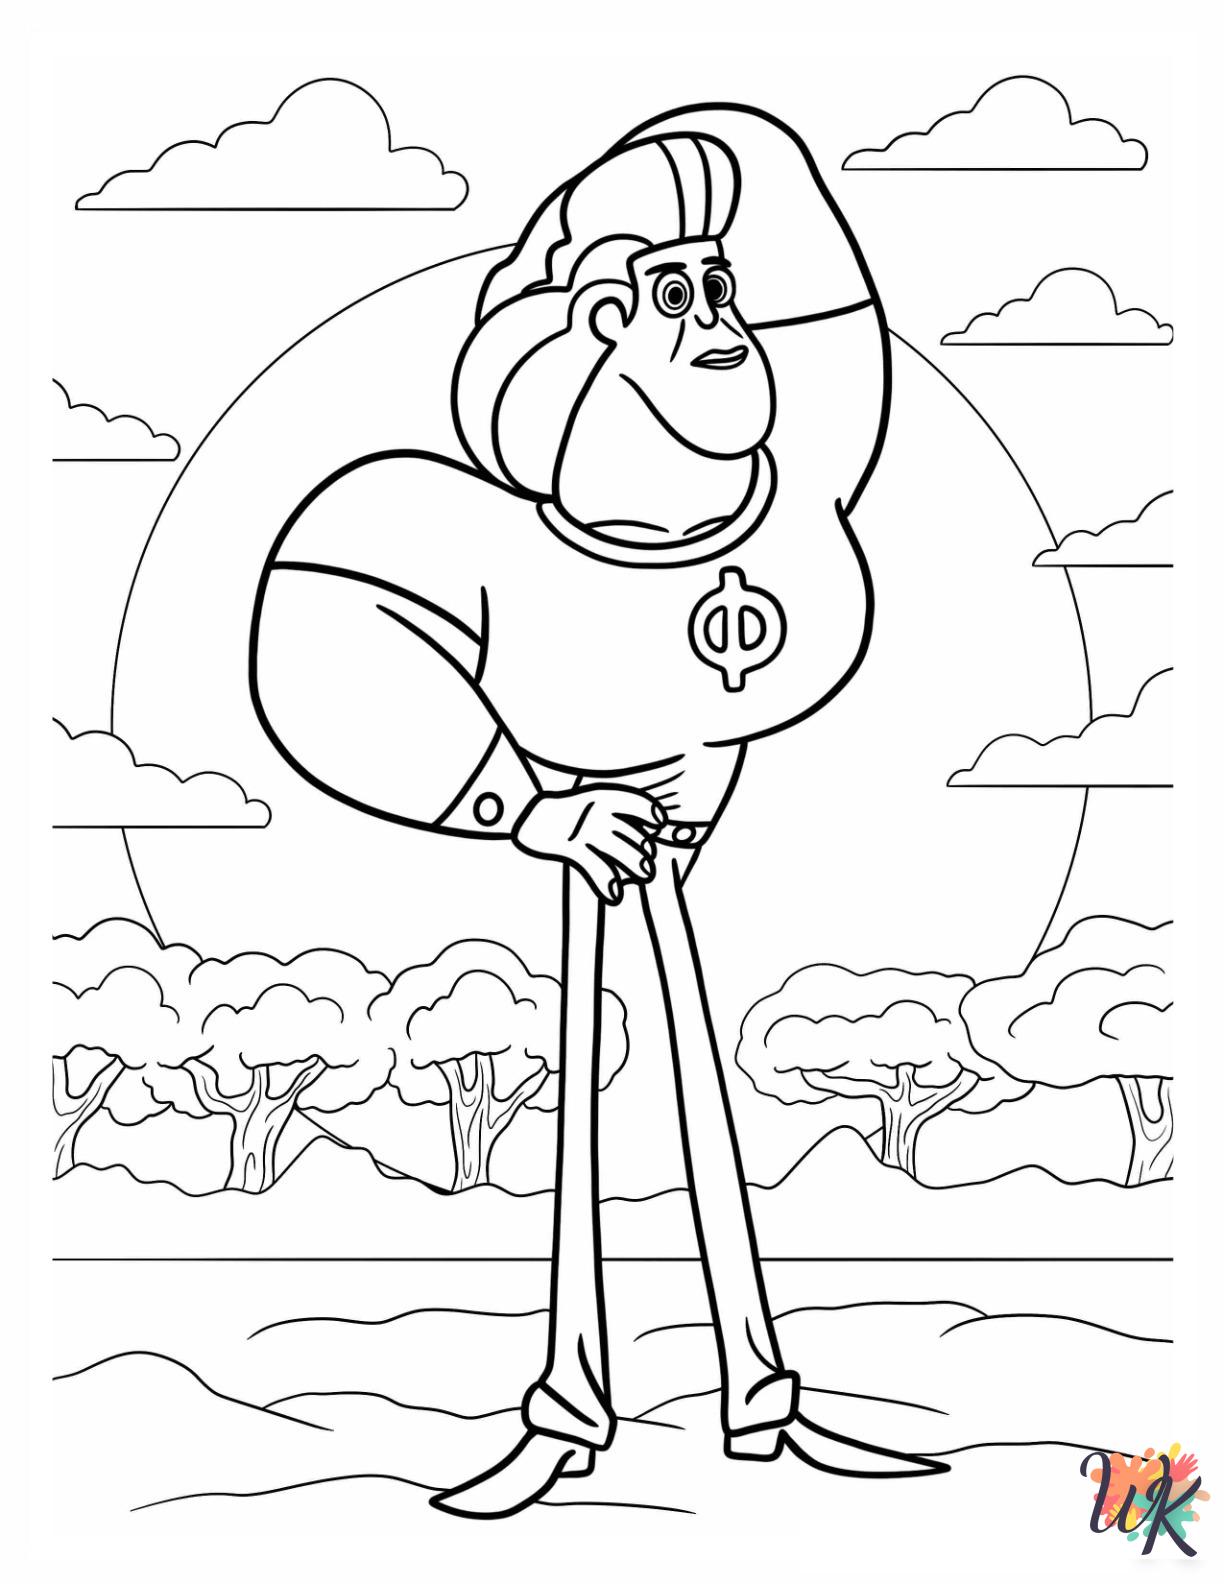 Wild Kratts coloring pages to print